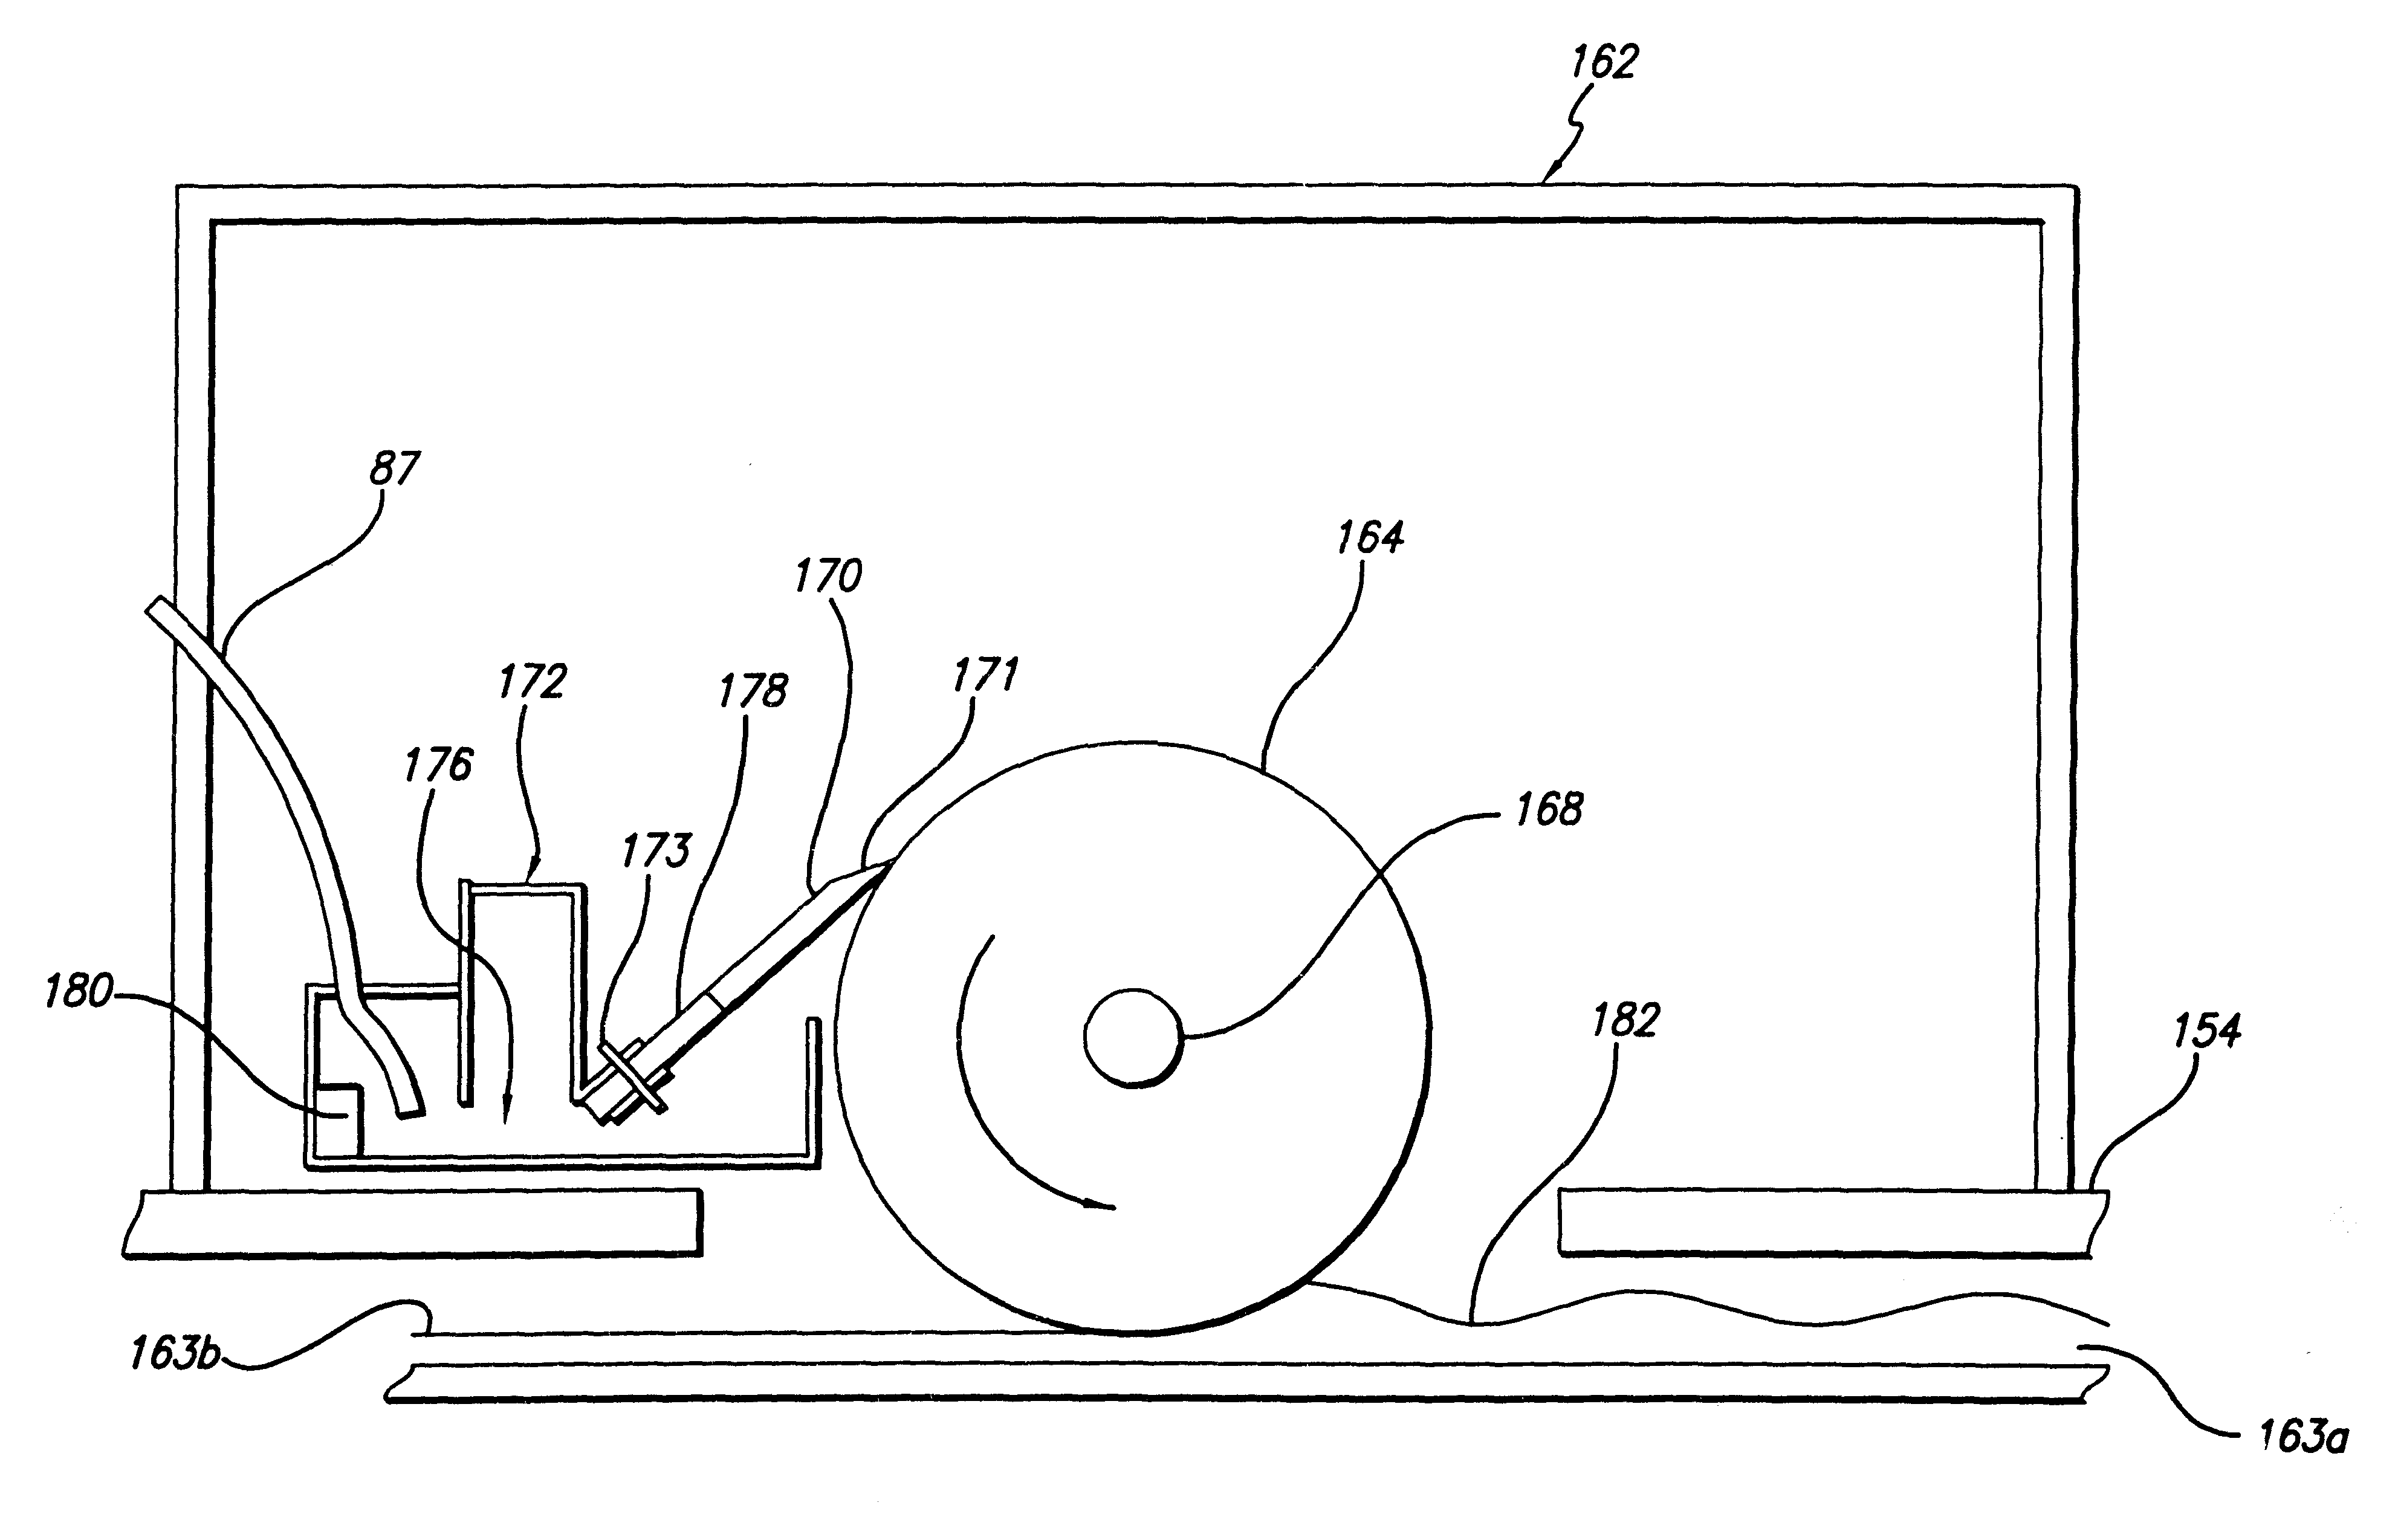 Selective deposition modeling system and method